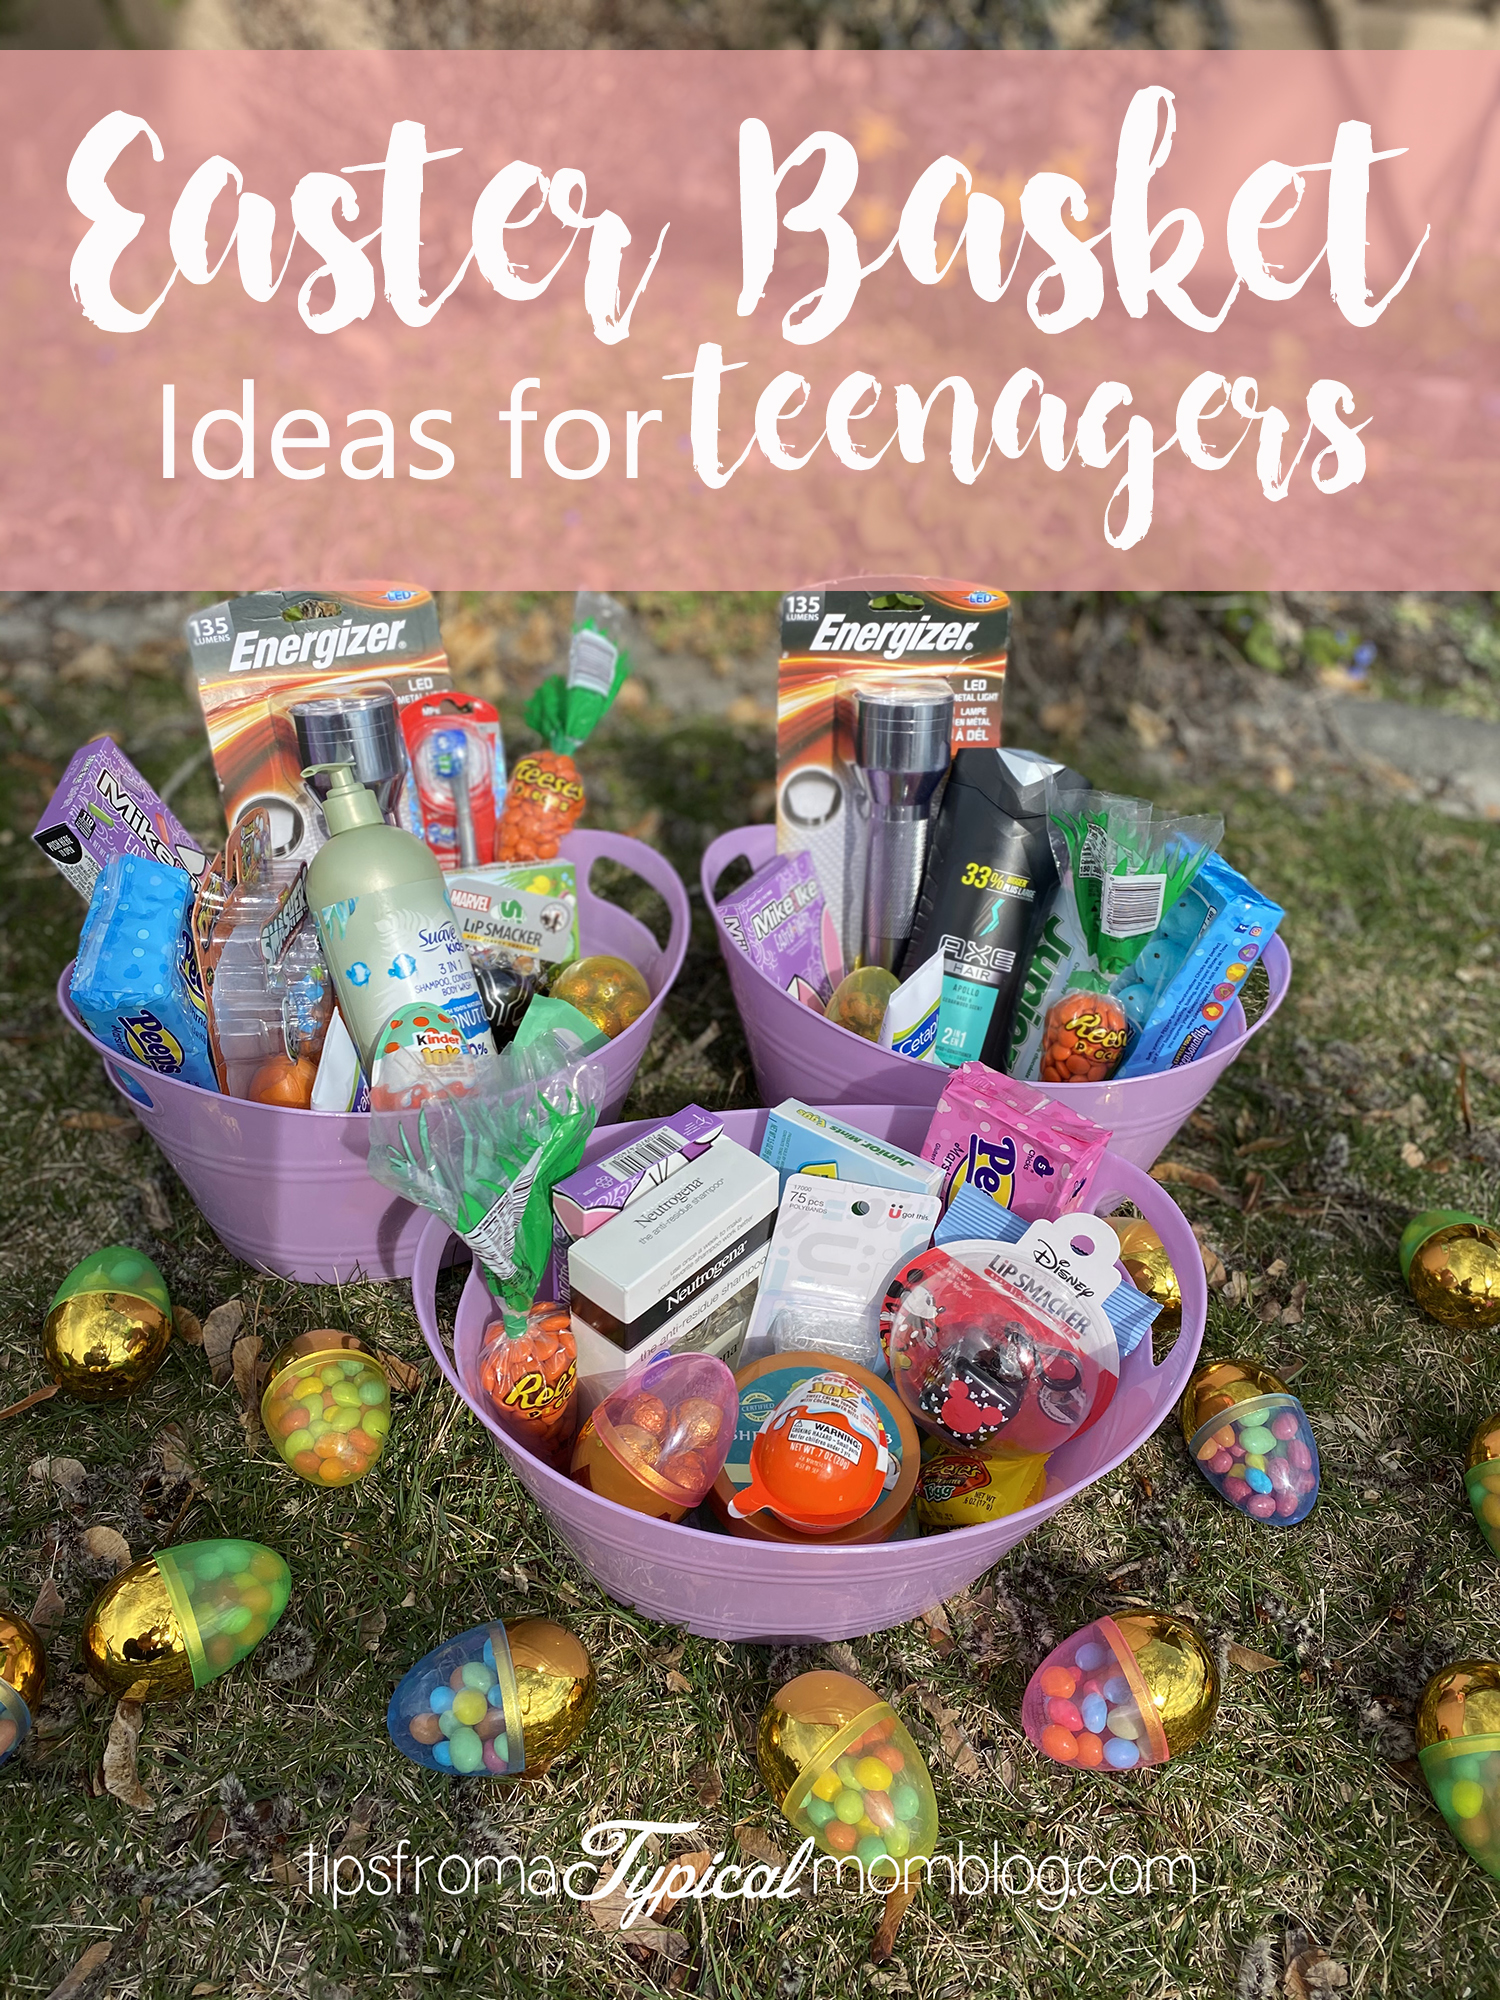 These Are the Best Non-Candy Easter Basket Fillers for Little Kids